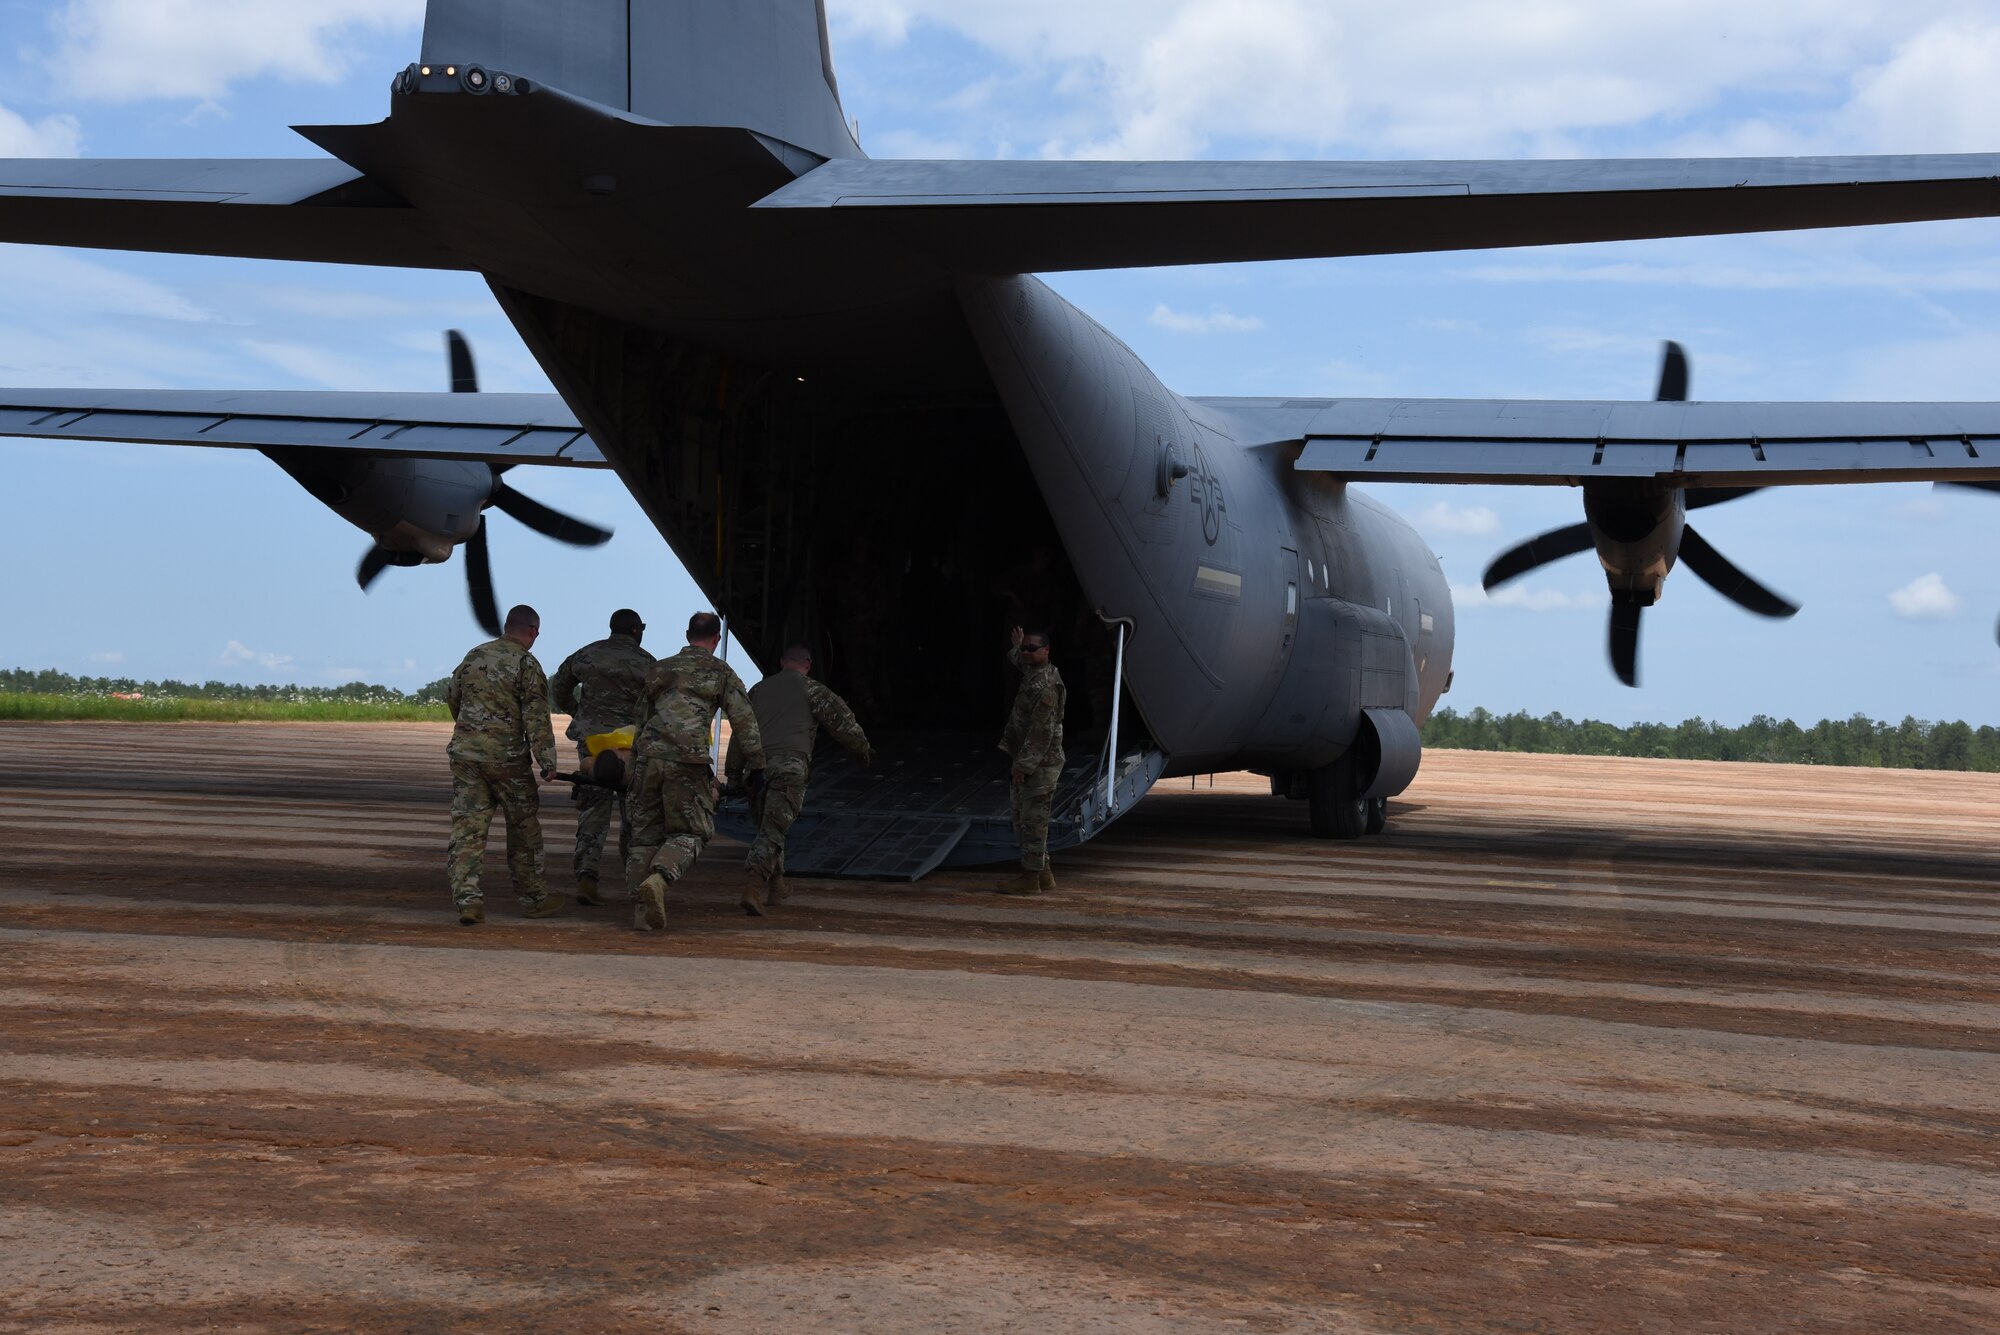 The 815th Airlift Squadron trained with aeromedical evacuation personnel completing engine running on and off load of patients during Voyager Shield, an exercise hosted by the 621st Air Mobility Advisory Group at the Joint Readiness Training Center and Fort Polk, La., May 25-27. This exercise provided the 815th AS required tactical training for the pilots and loadmasters, while they provided airlift and airdrop support. Pilots trained on communicating with landing and drop zone controllers, semi-prepared runway operations, and assault landings. Loadmaster specific training included rolling stock loading/unloading in both normal and engine running operations, patient loading with engines running and personnel drops. (U.S. Air Force photo by Jessica L. Kendziorek)